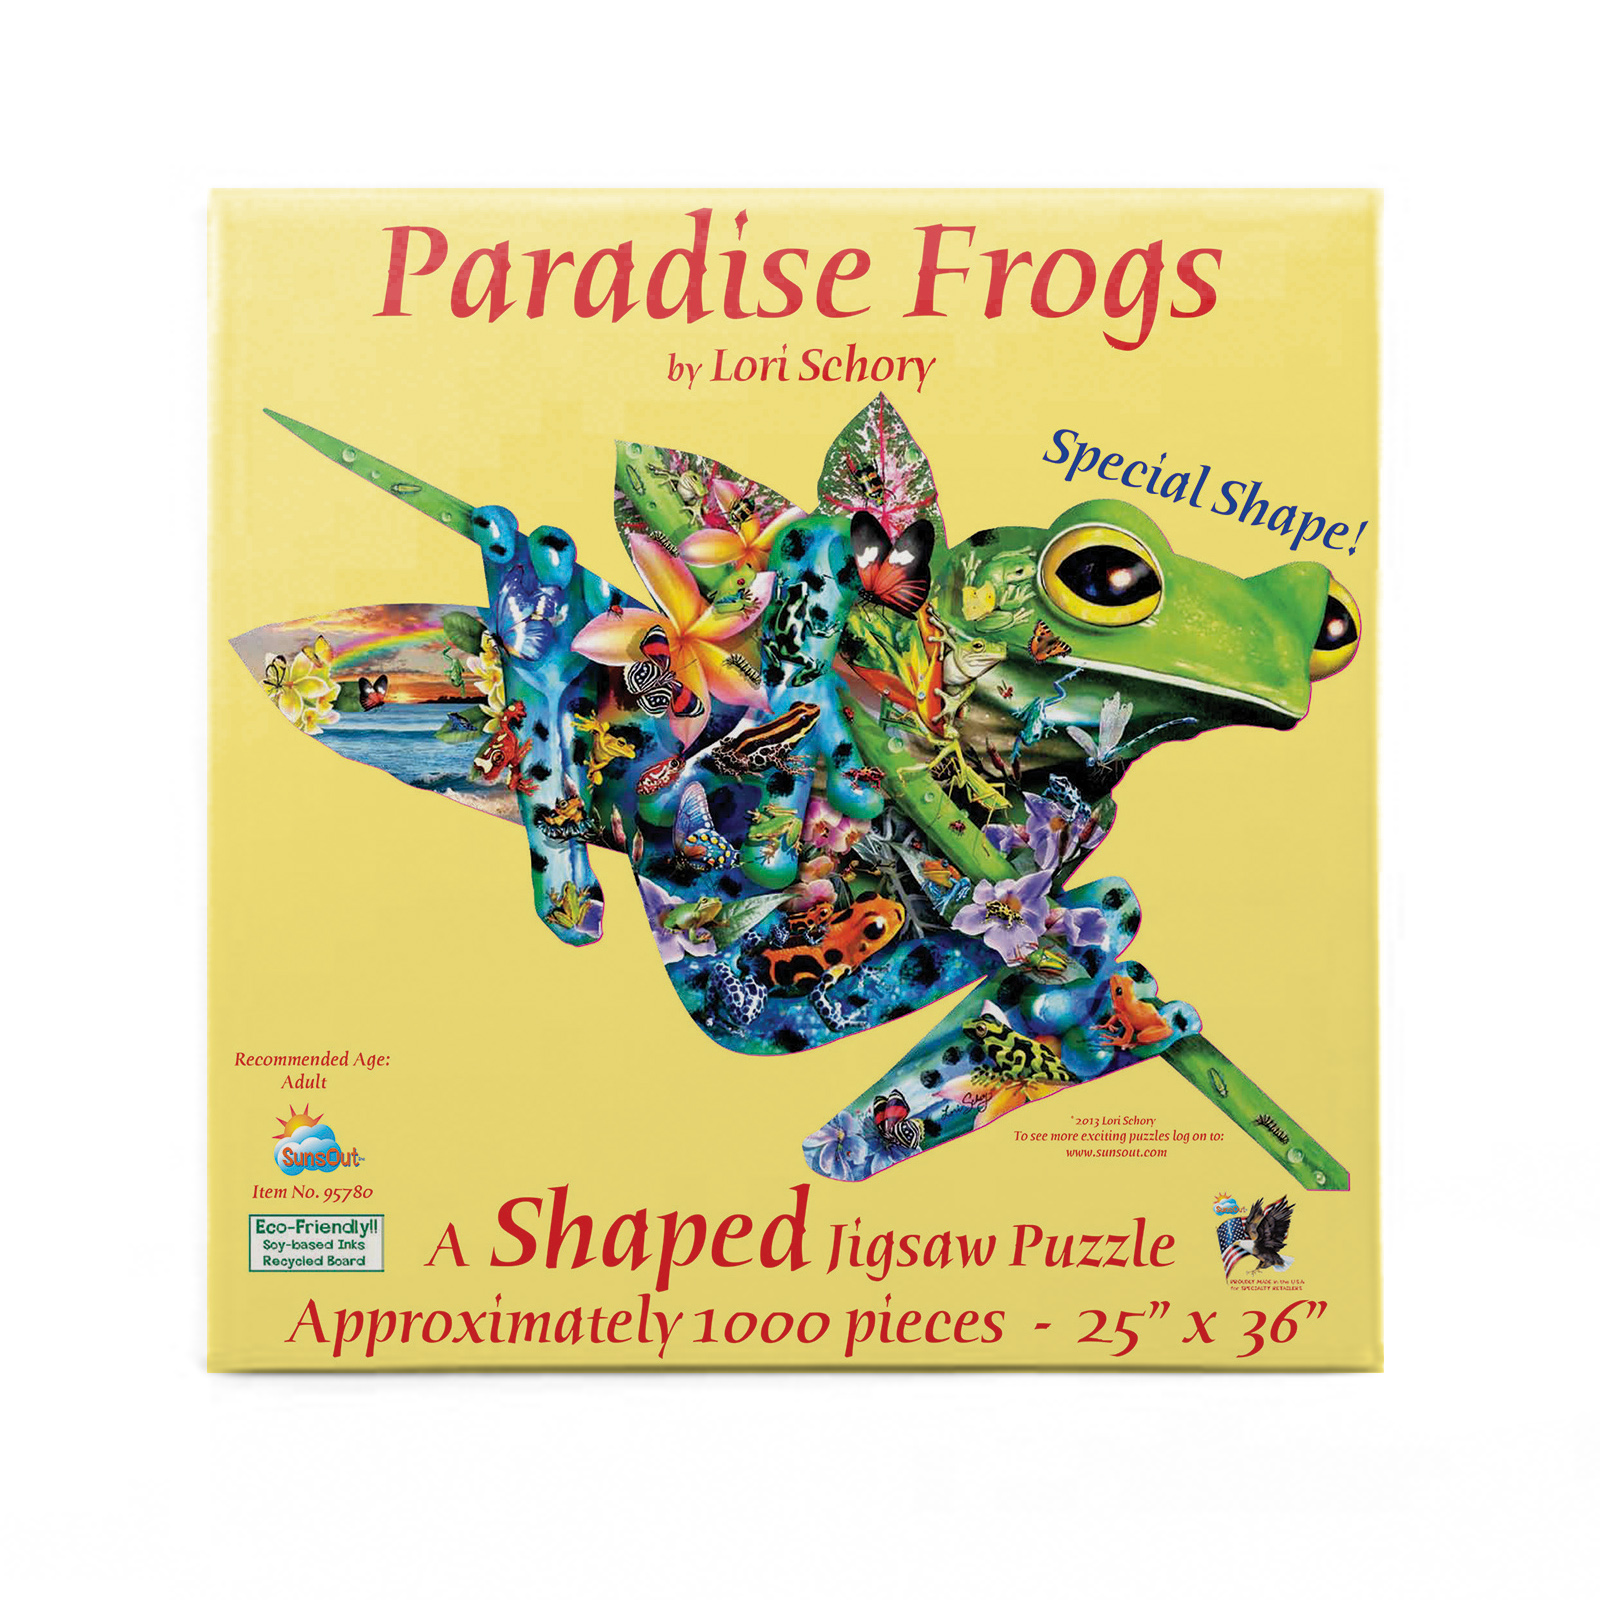 Paradise Frogs